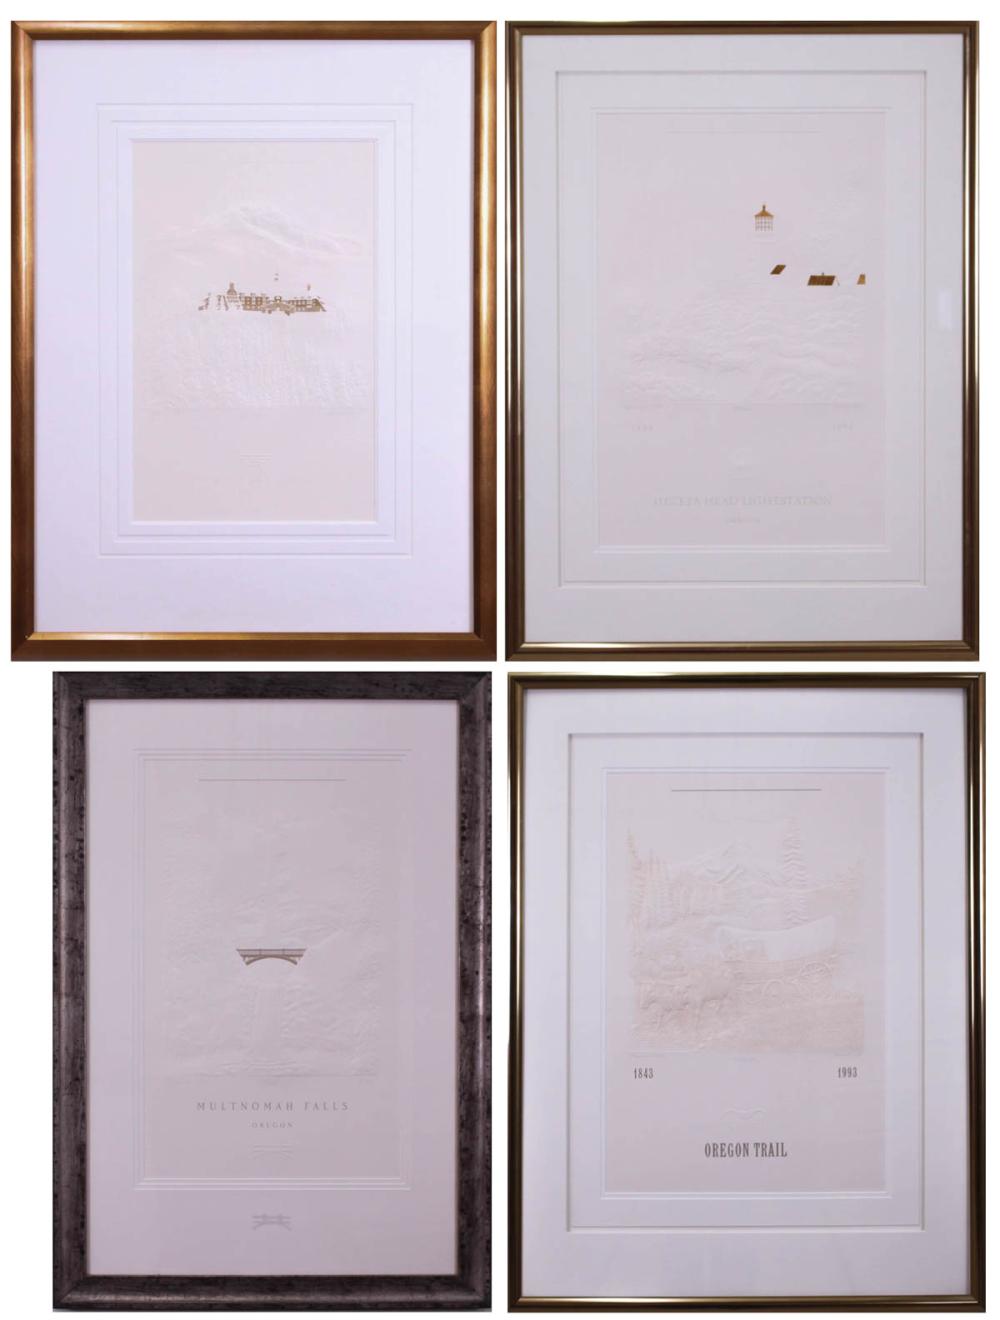 FOUR EMBOSSED COLLECTIBLE PRINTS 34217b